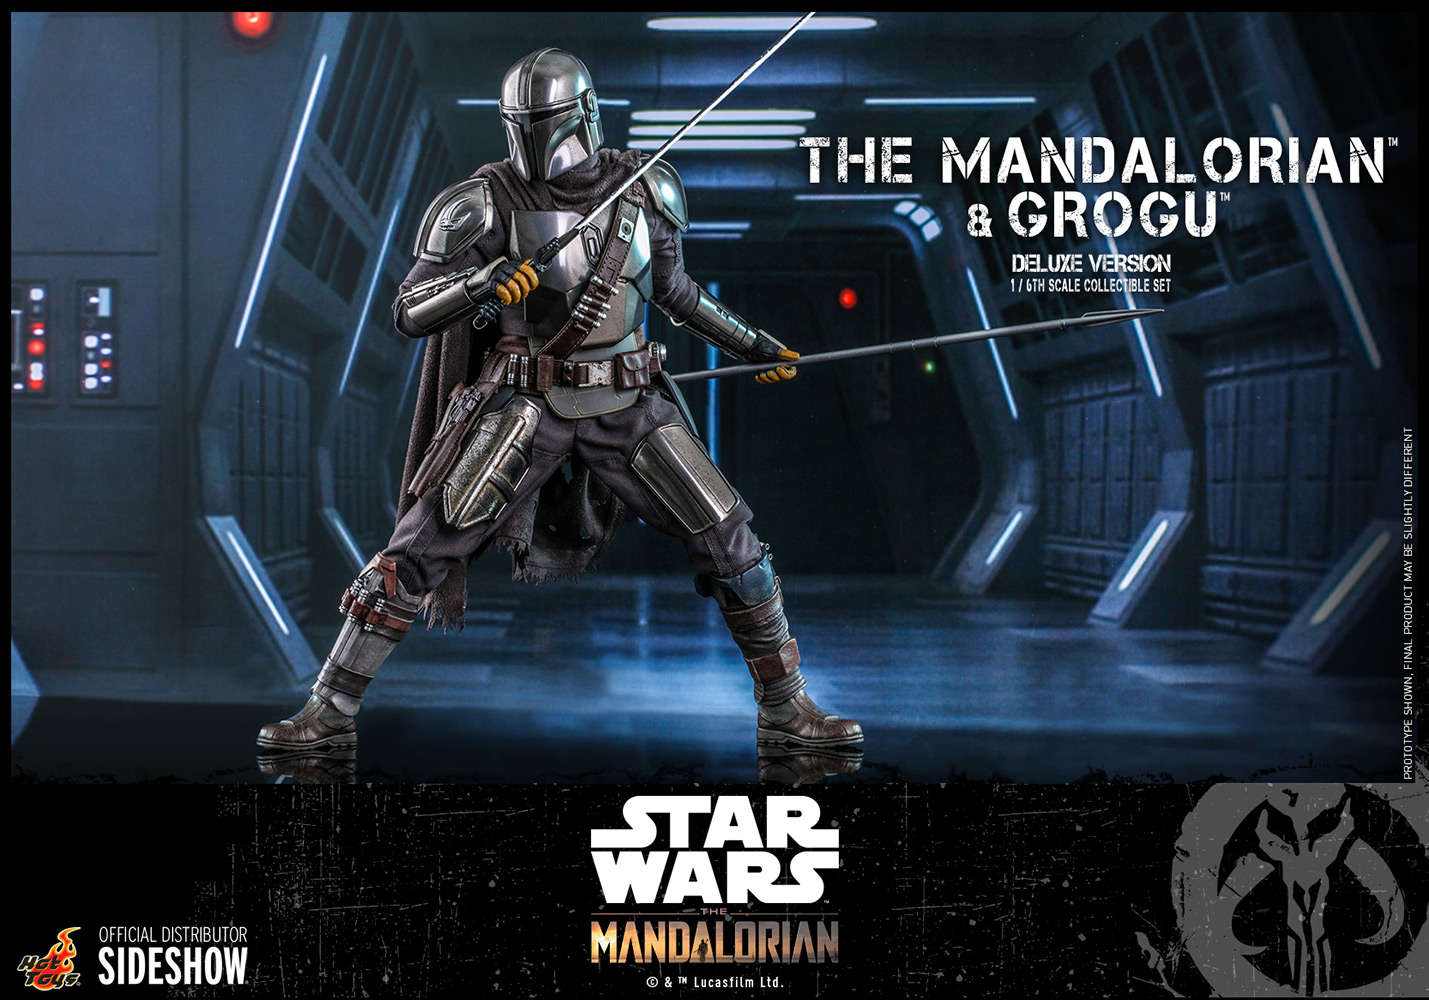 the-mandalorian-and-grogu-deluxe-version_star-wars_gallery_60db637a50d0e.jpg